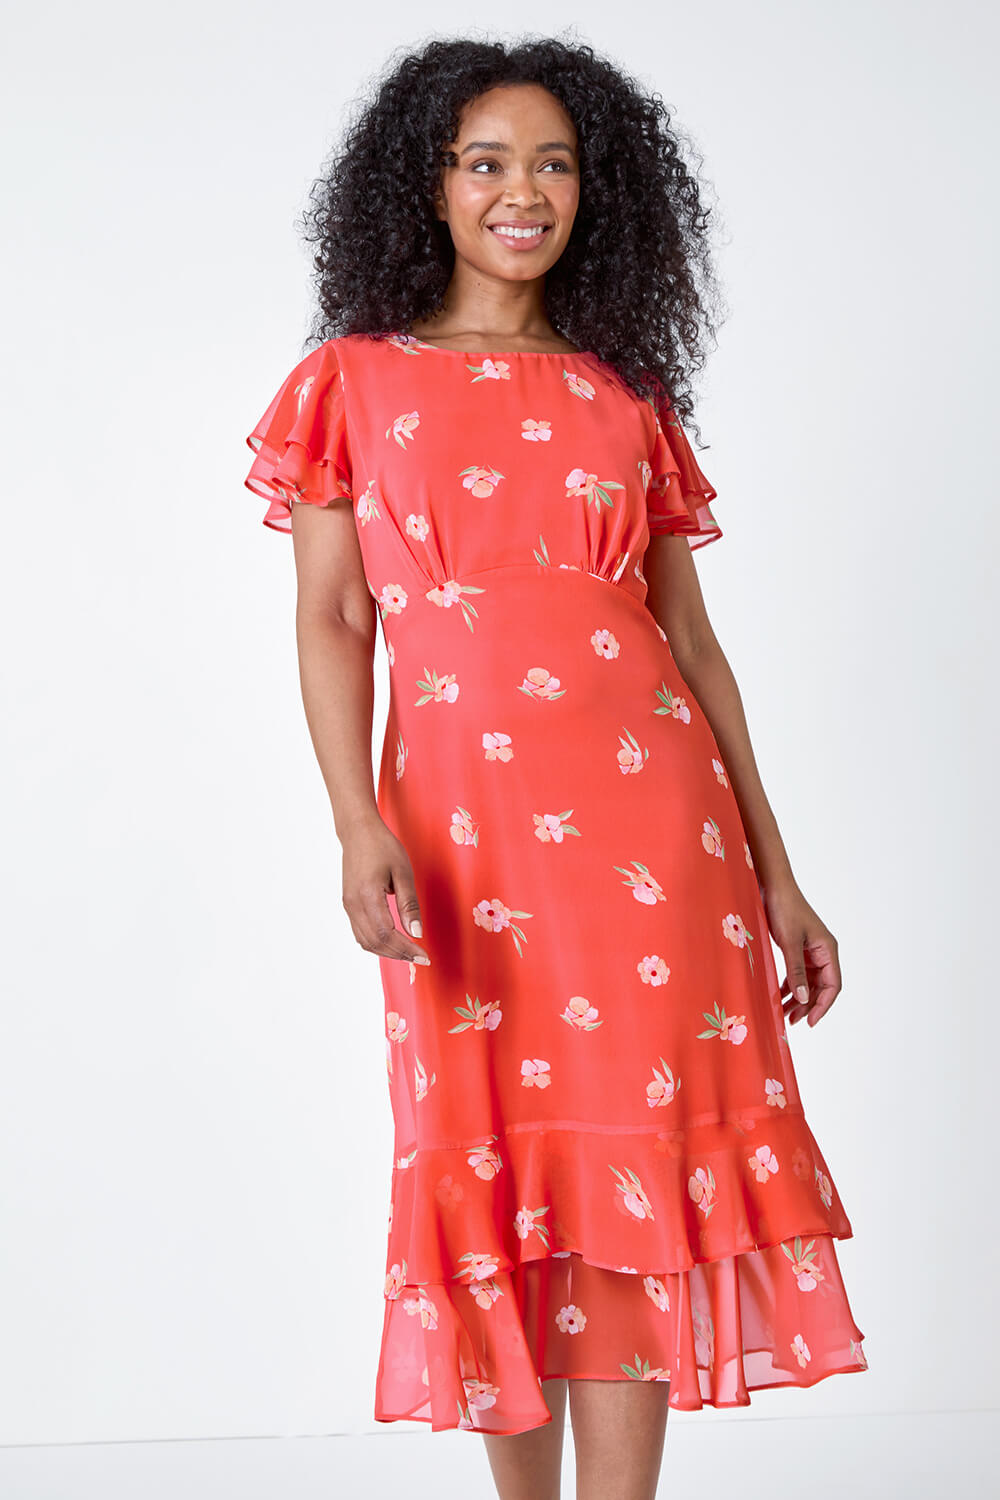 CORAL Petite Floral Frill Tiered Midi Dress, Image 2 of 5